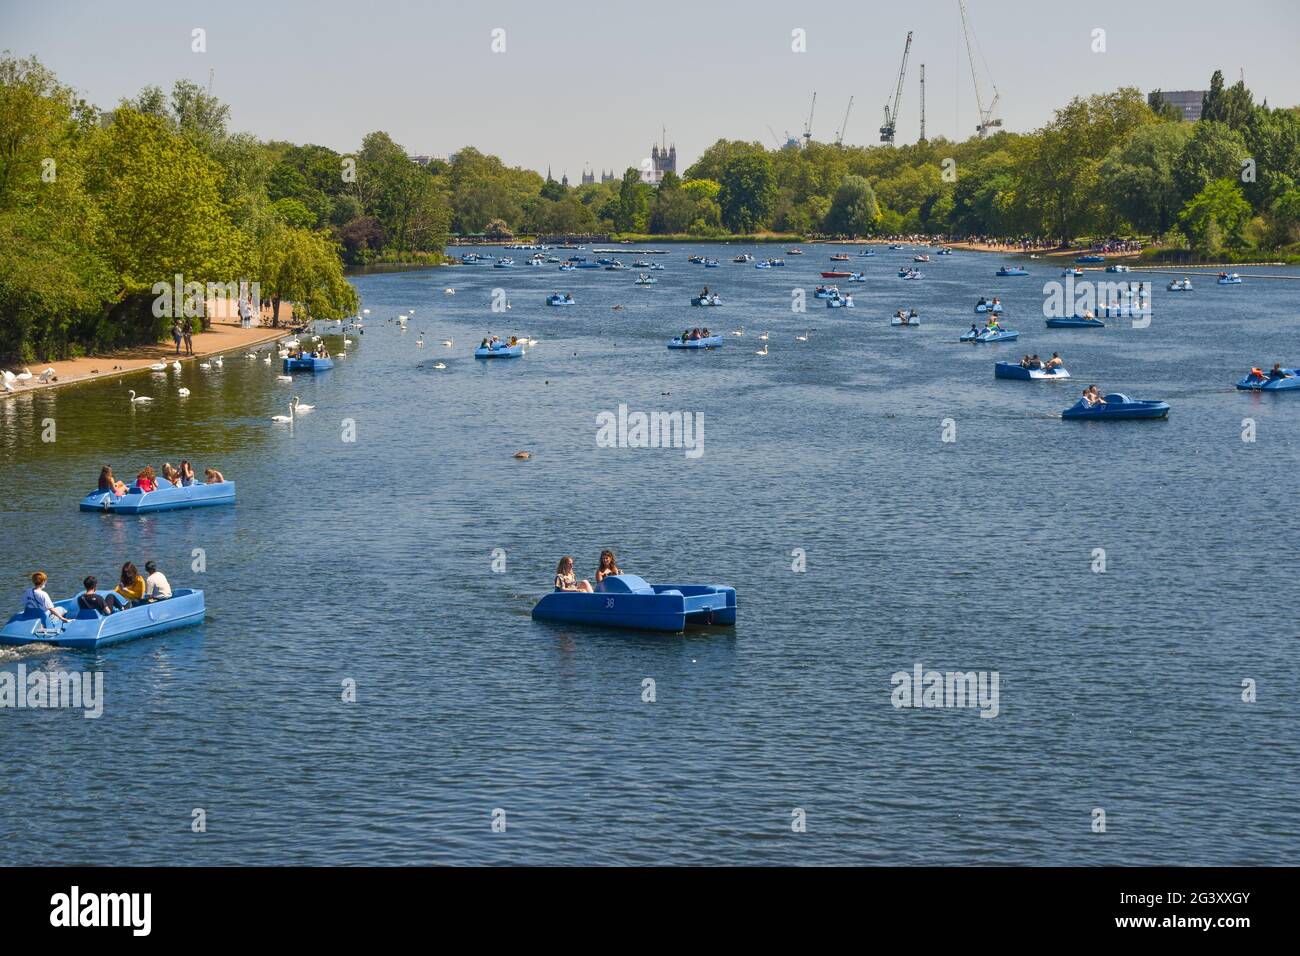 People in pedal boats on The Serpentine, Hyde Park. London, United Kingdom 31 May 2021. Stock Photo